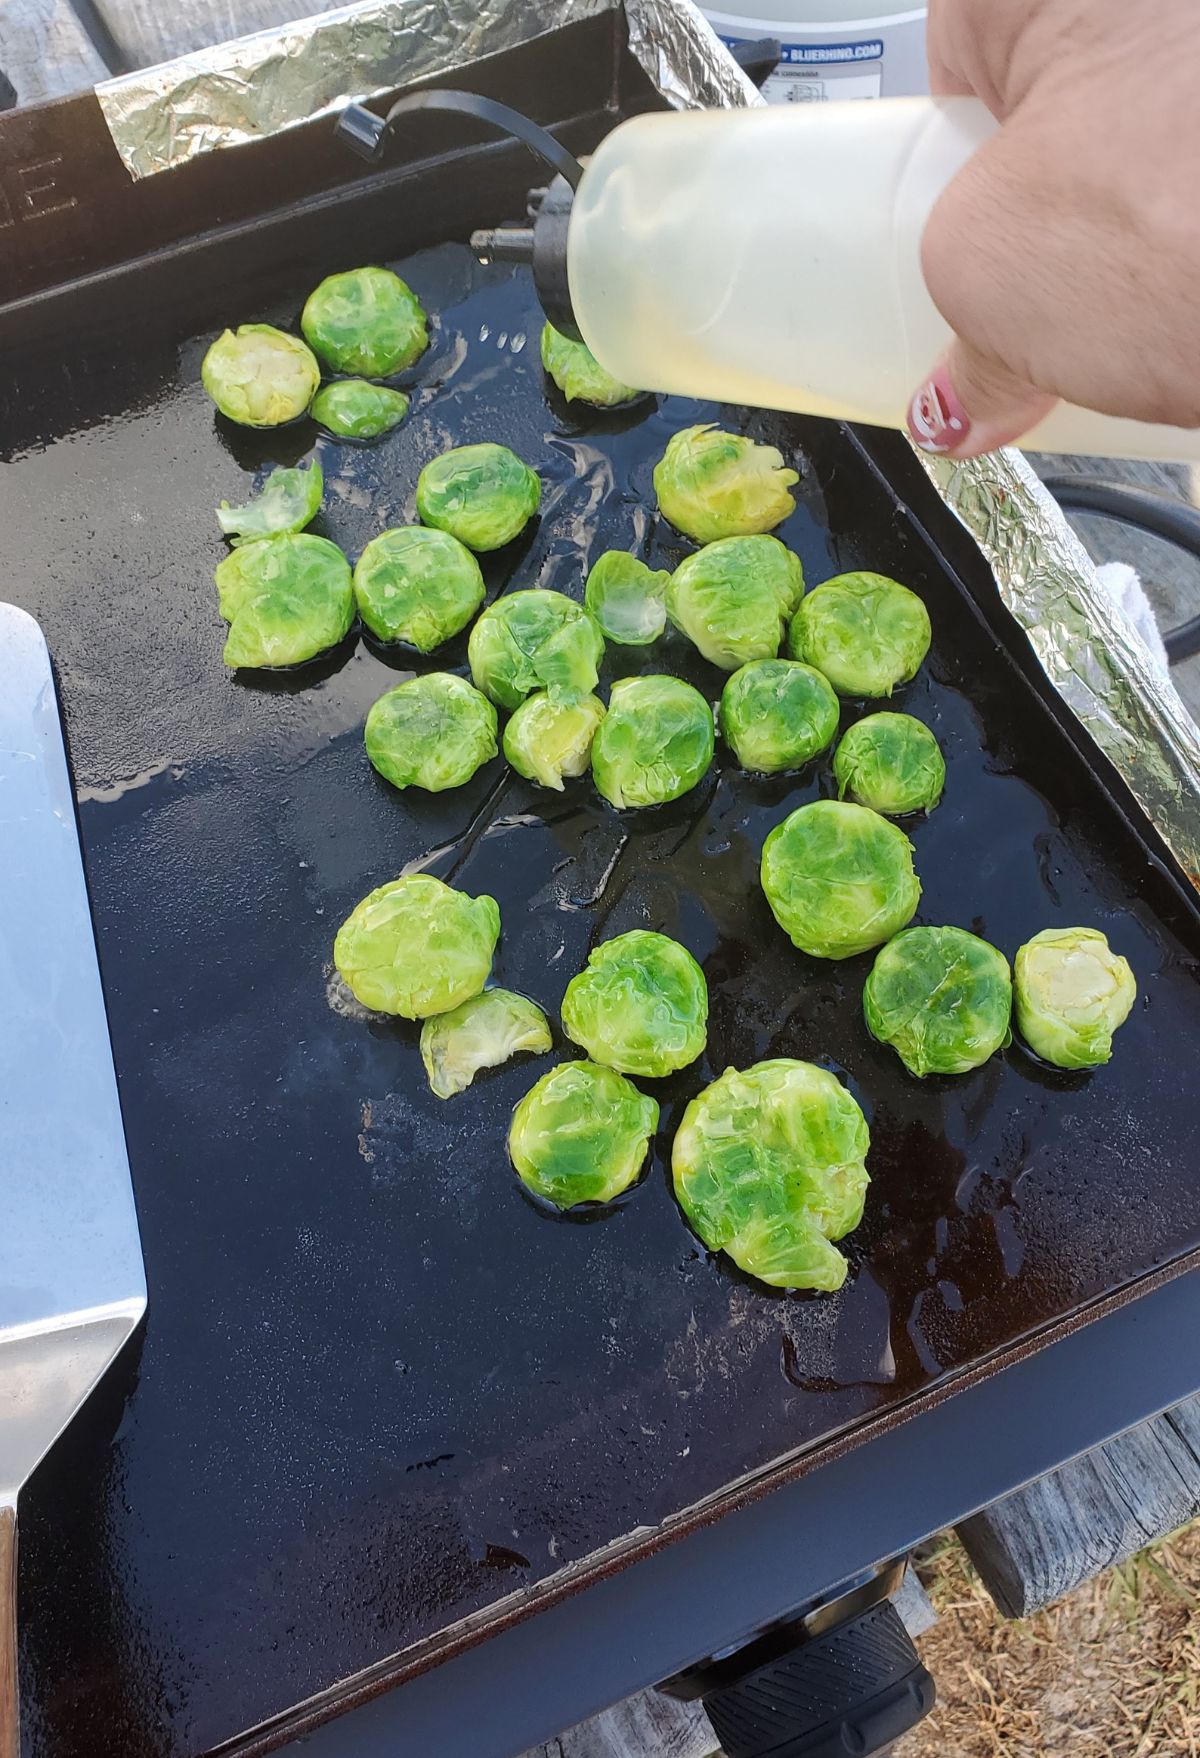 Brussel sprouts being cooked on a grill.